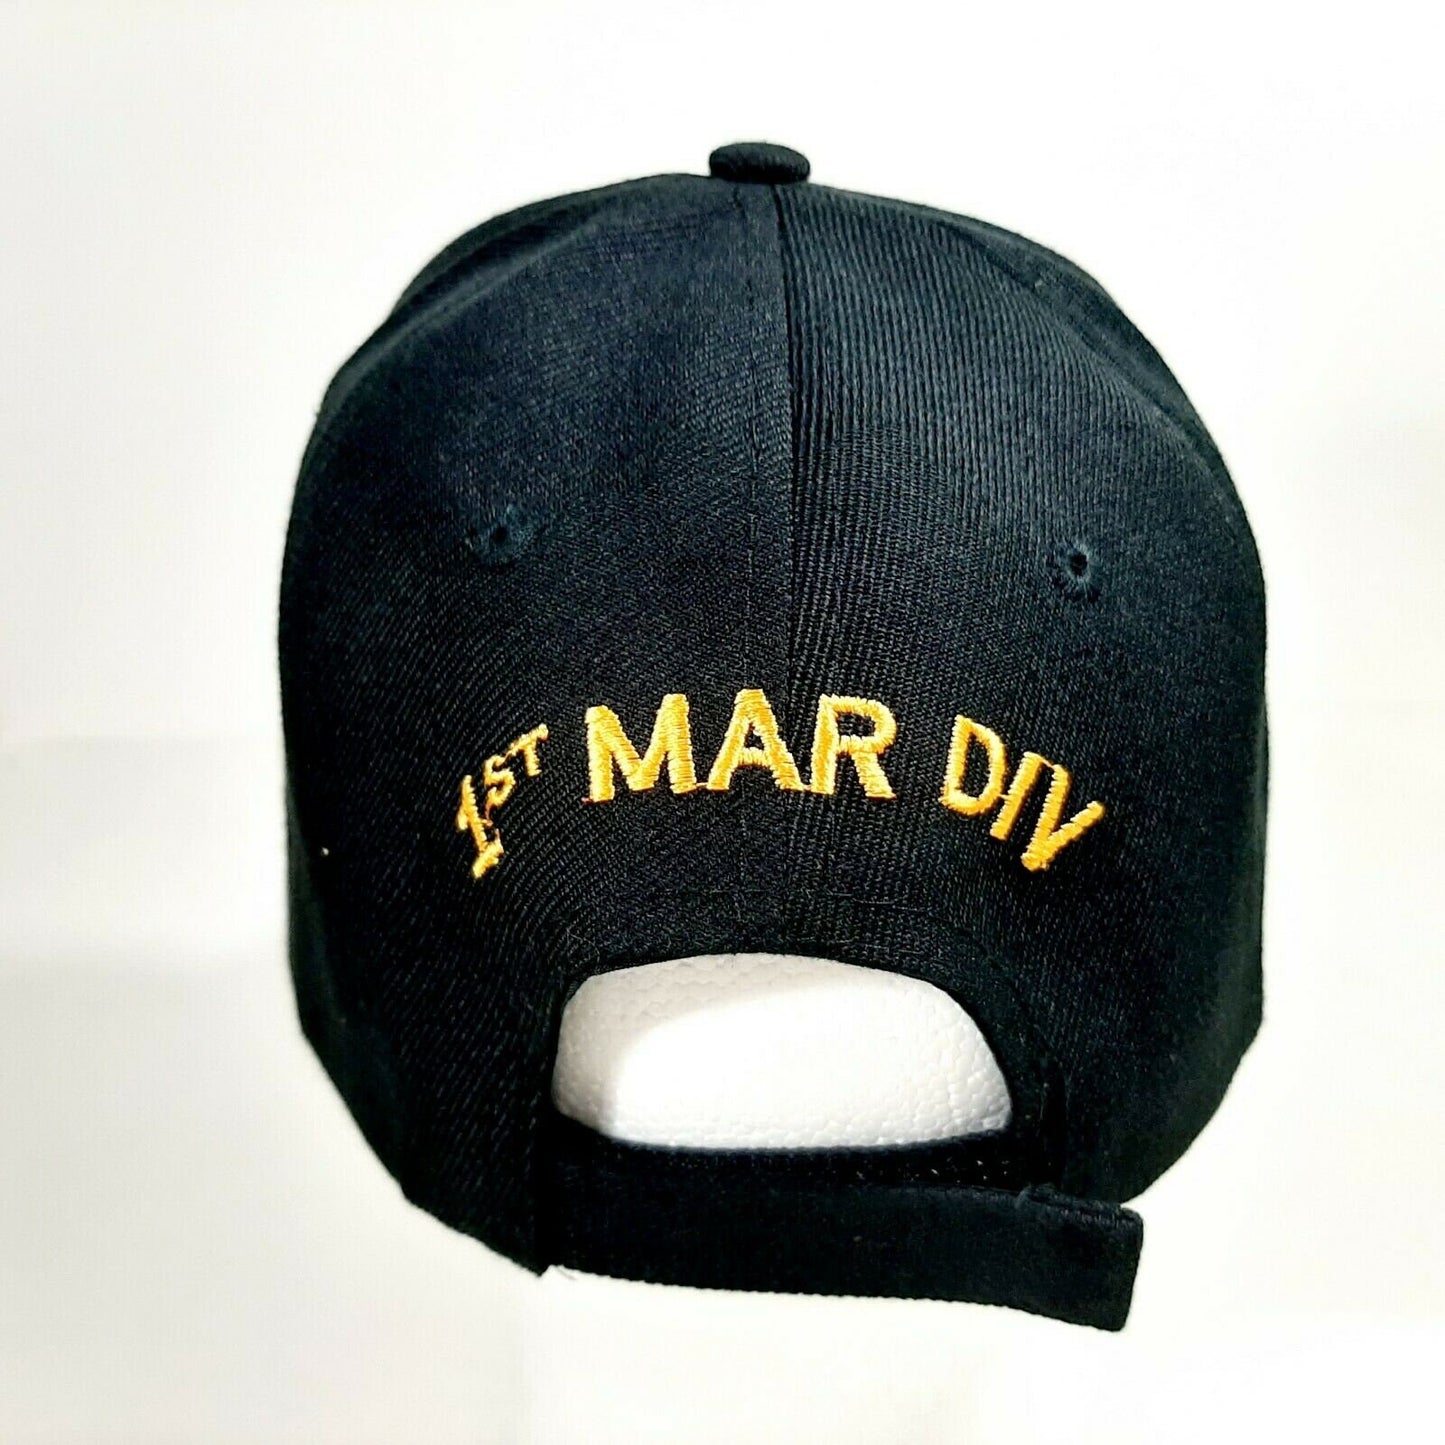 1st Marine Division Men's Ball Cap Hat Black Embroidered Acrylic